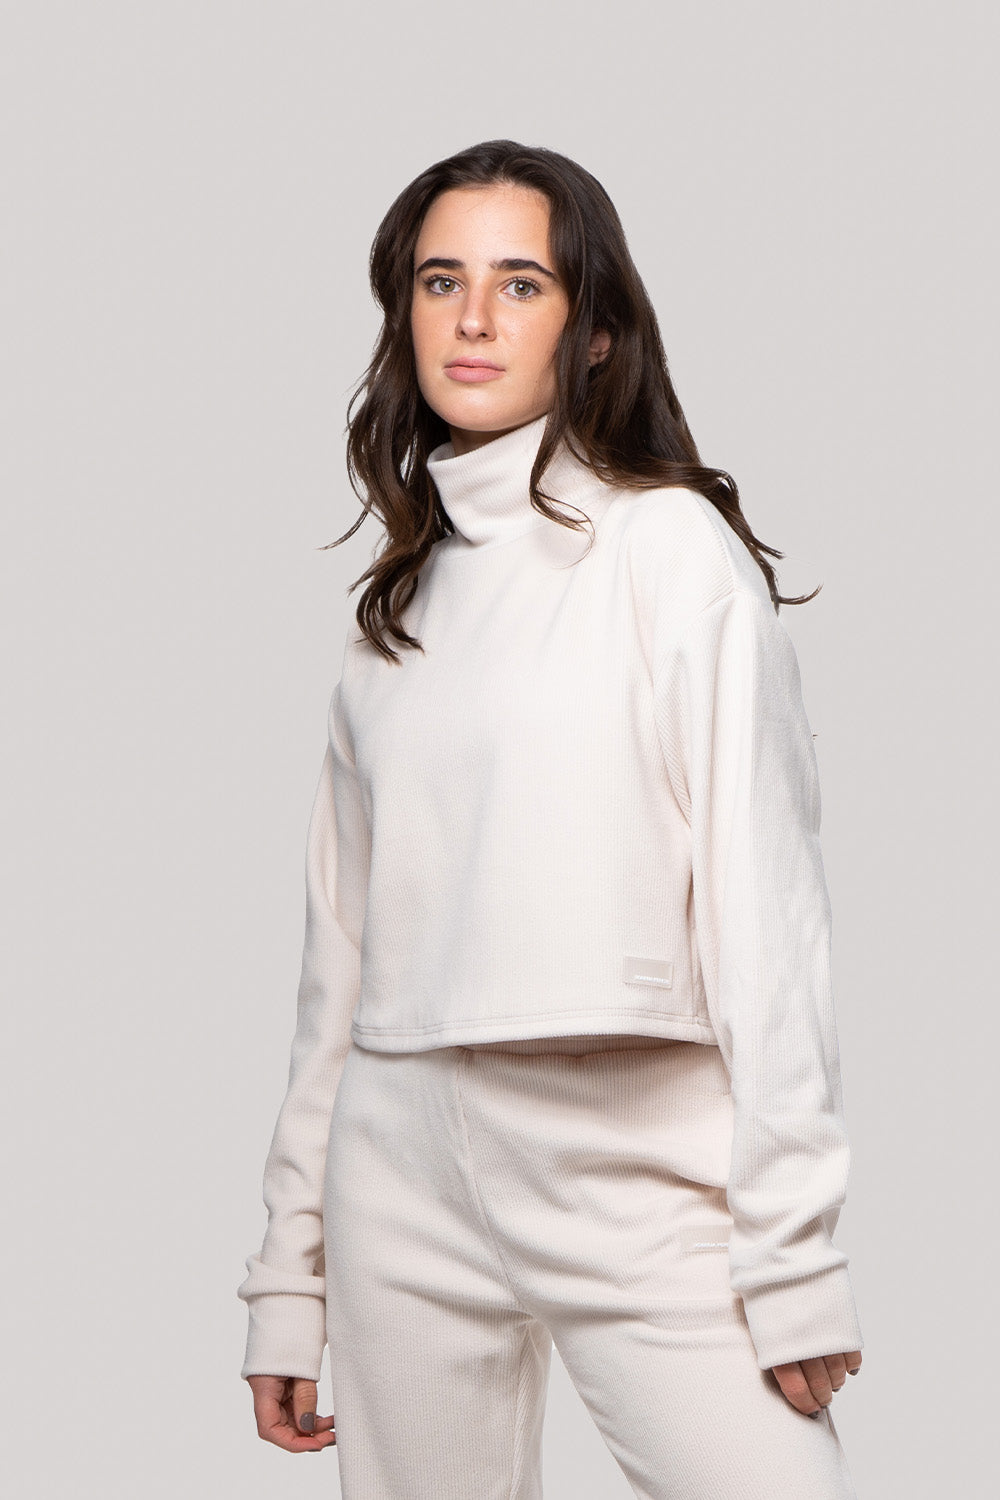 Evelyn - Relaxed Fit Turtle Neck Top